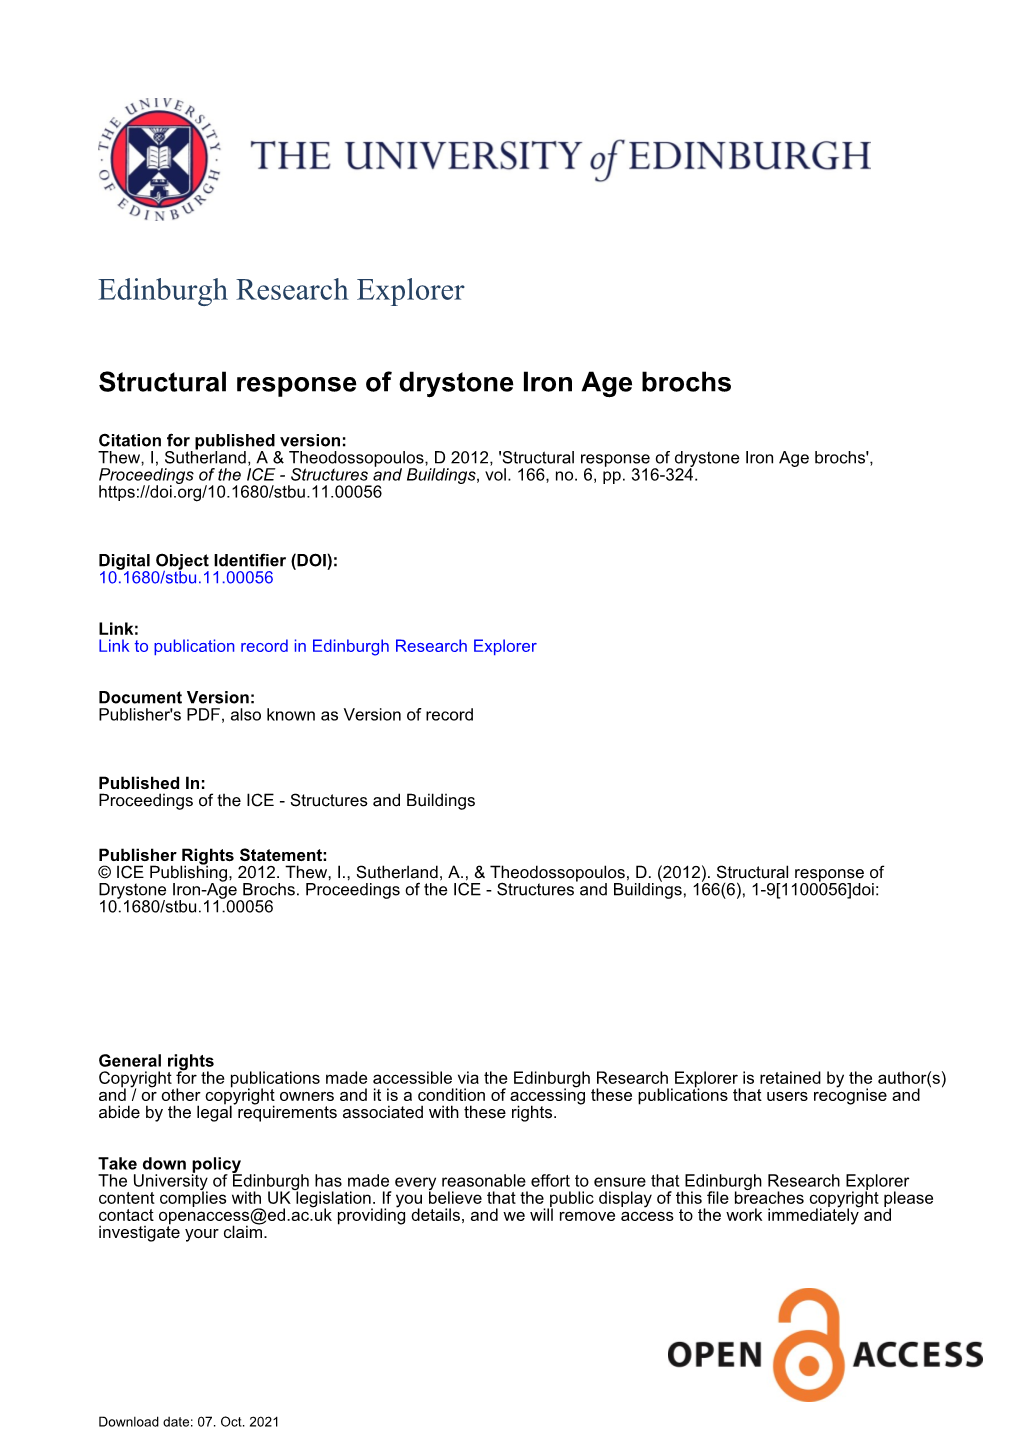 Structural Response of Drystone Iron Age Brochs